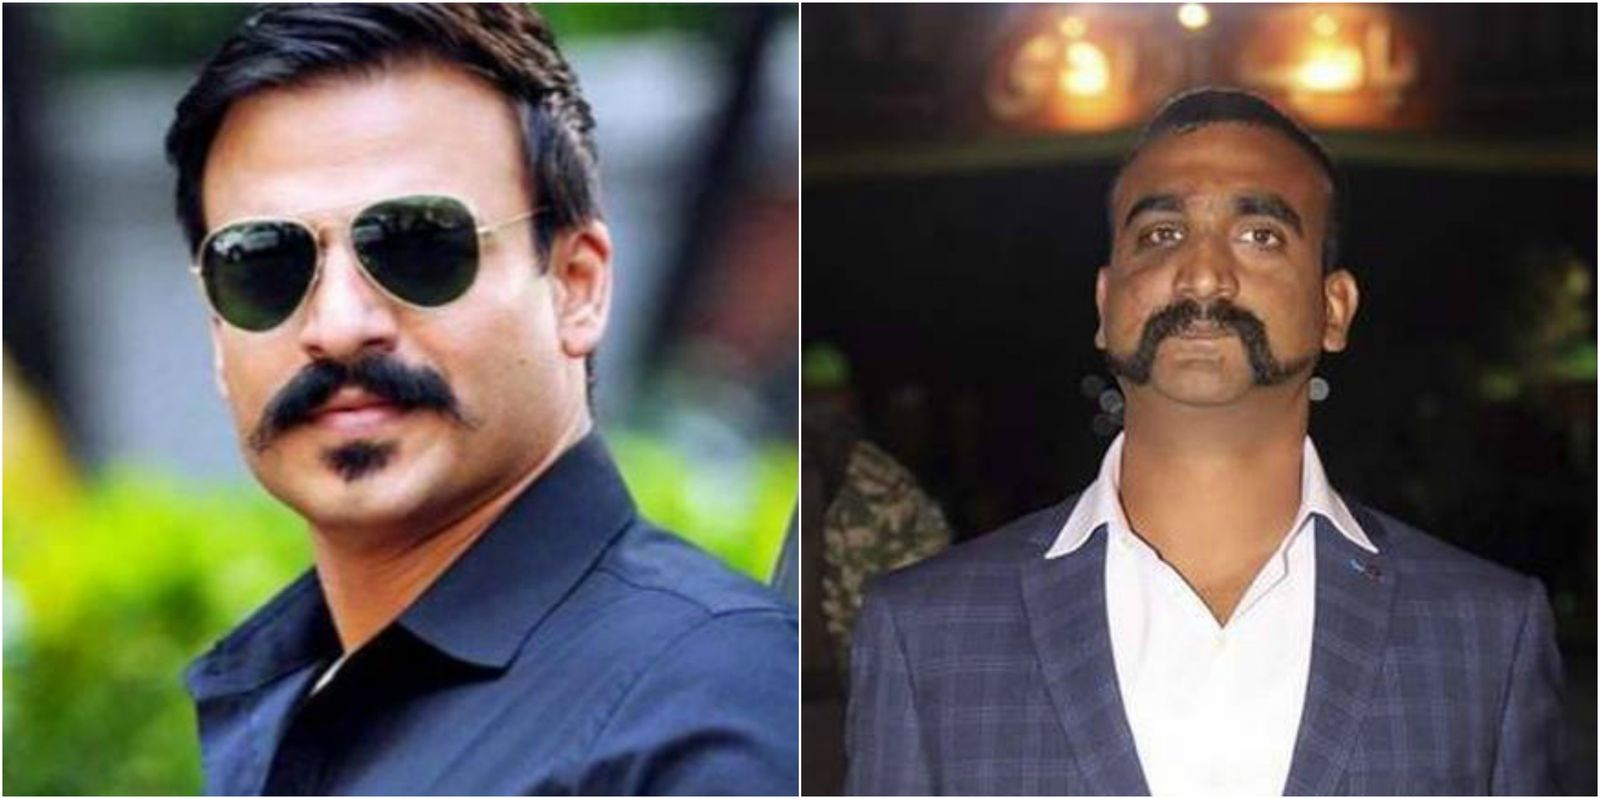 Vivek Oberoi Gets Permission From The Indian Air Force To Make A Film About Abhinandan And Balakot Air Strike